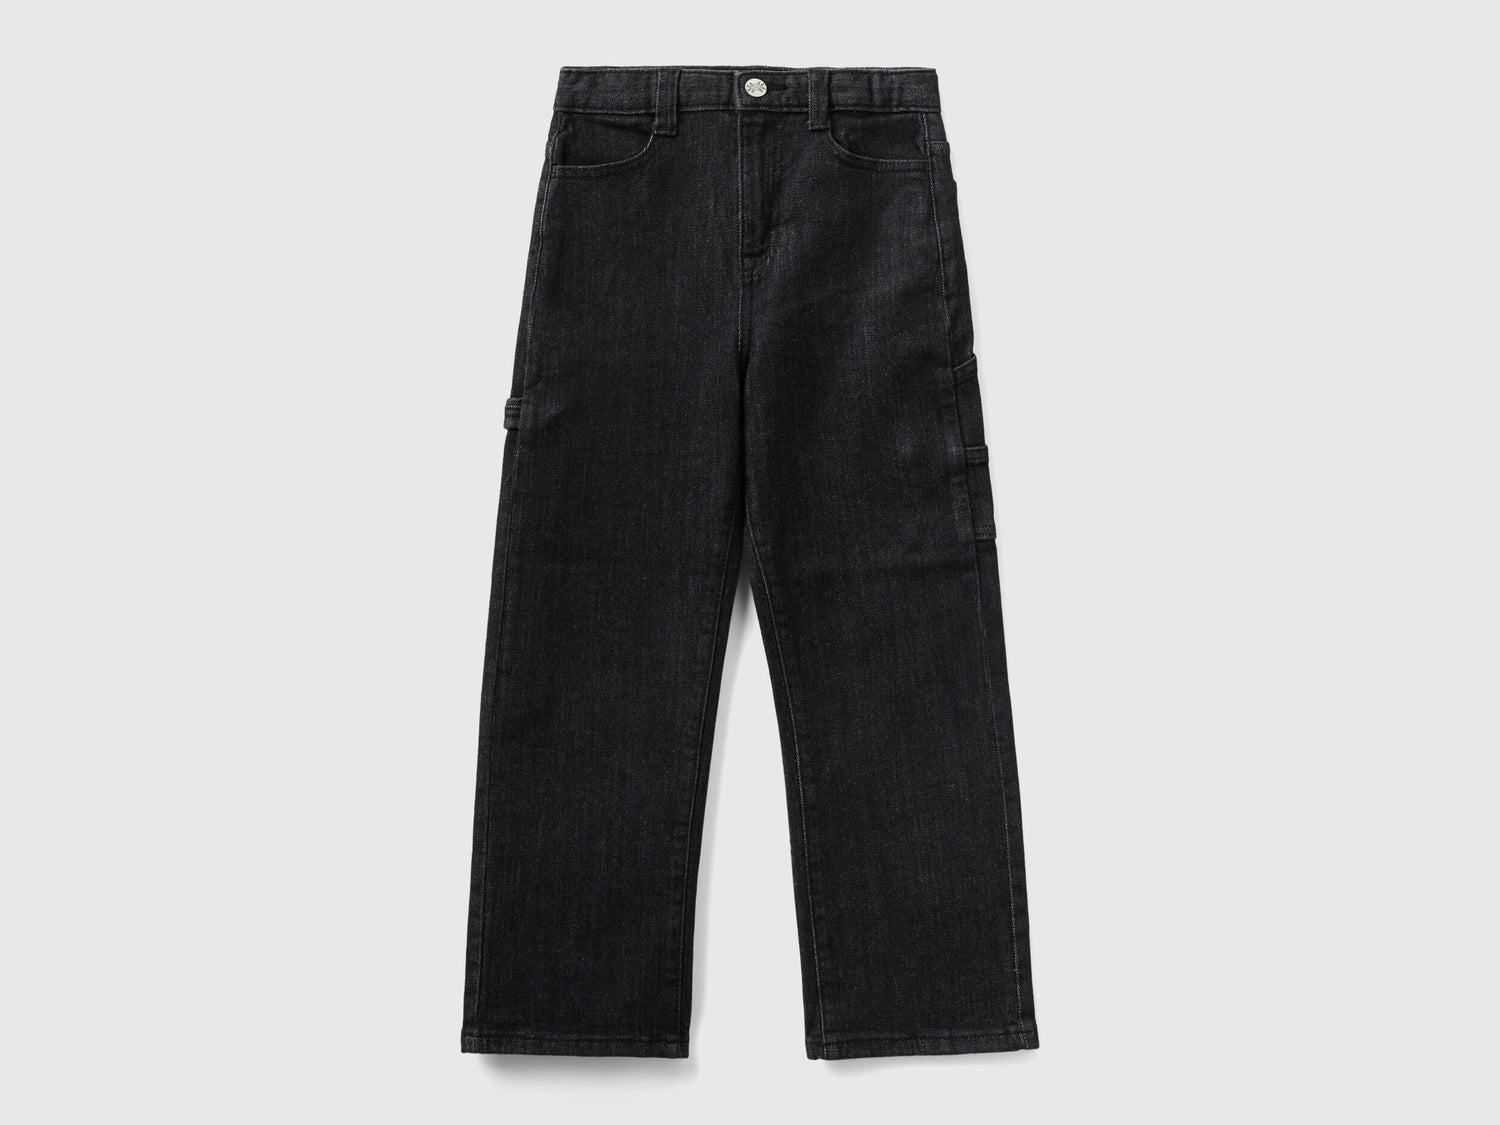 Worker Style Jeans_4EJVCF02F_700_01